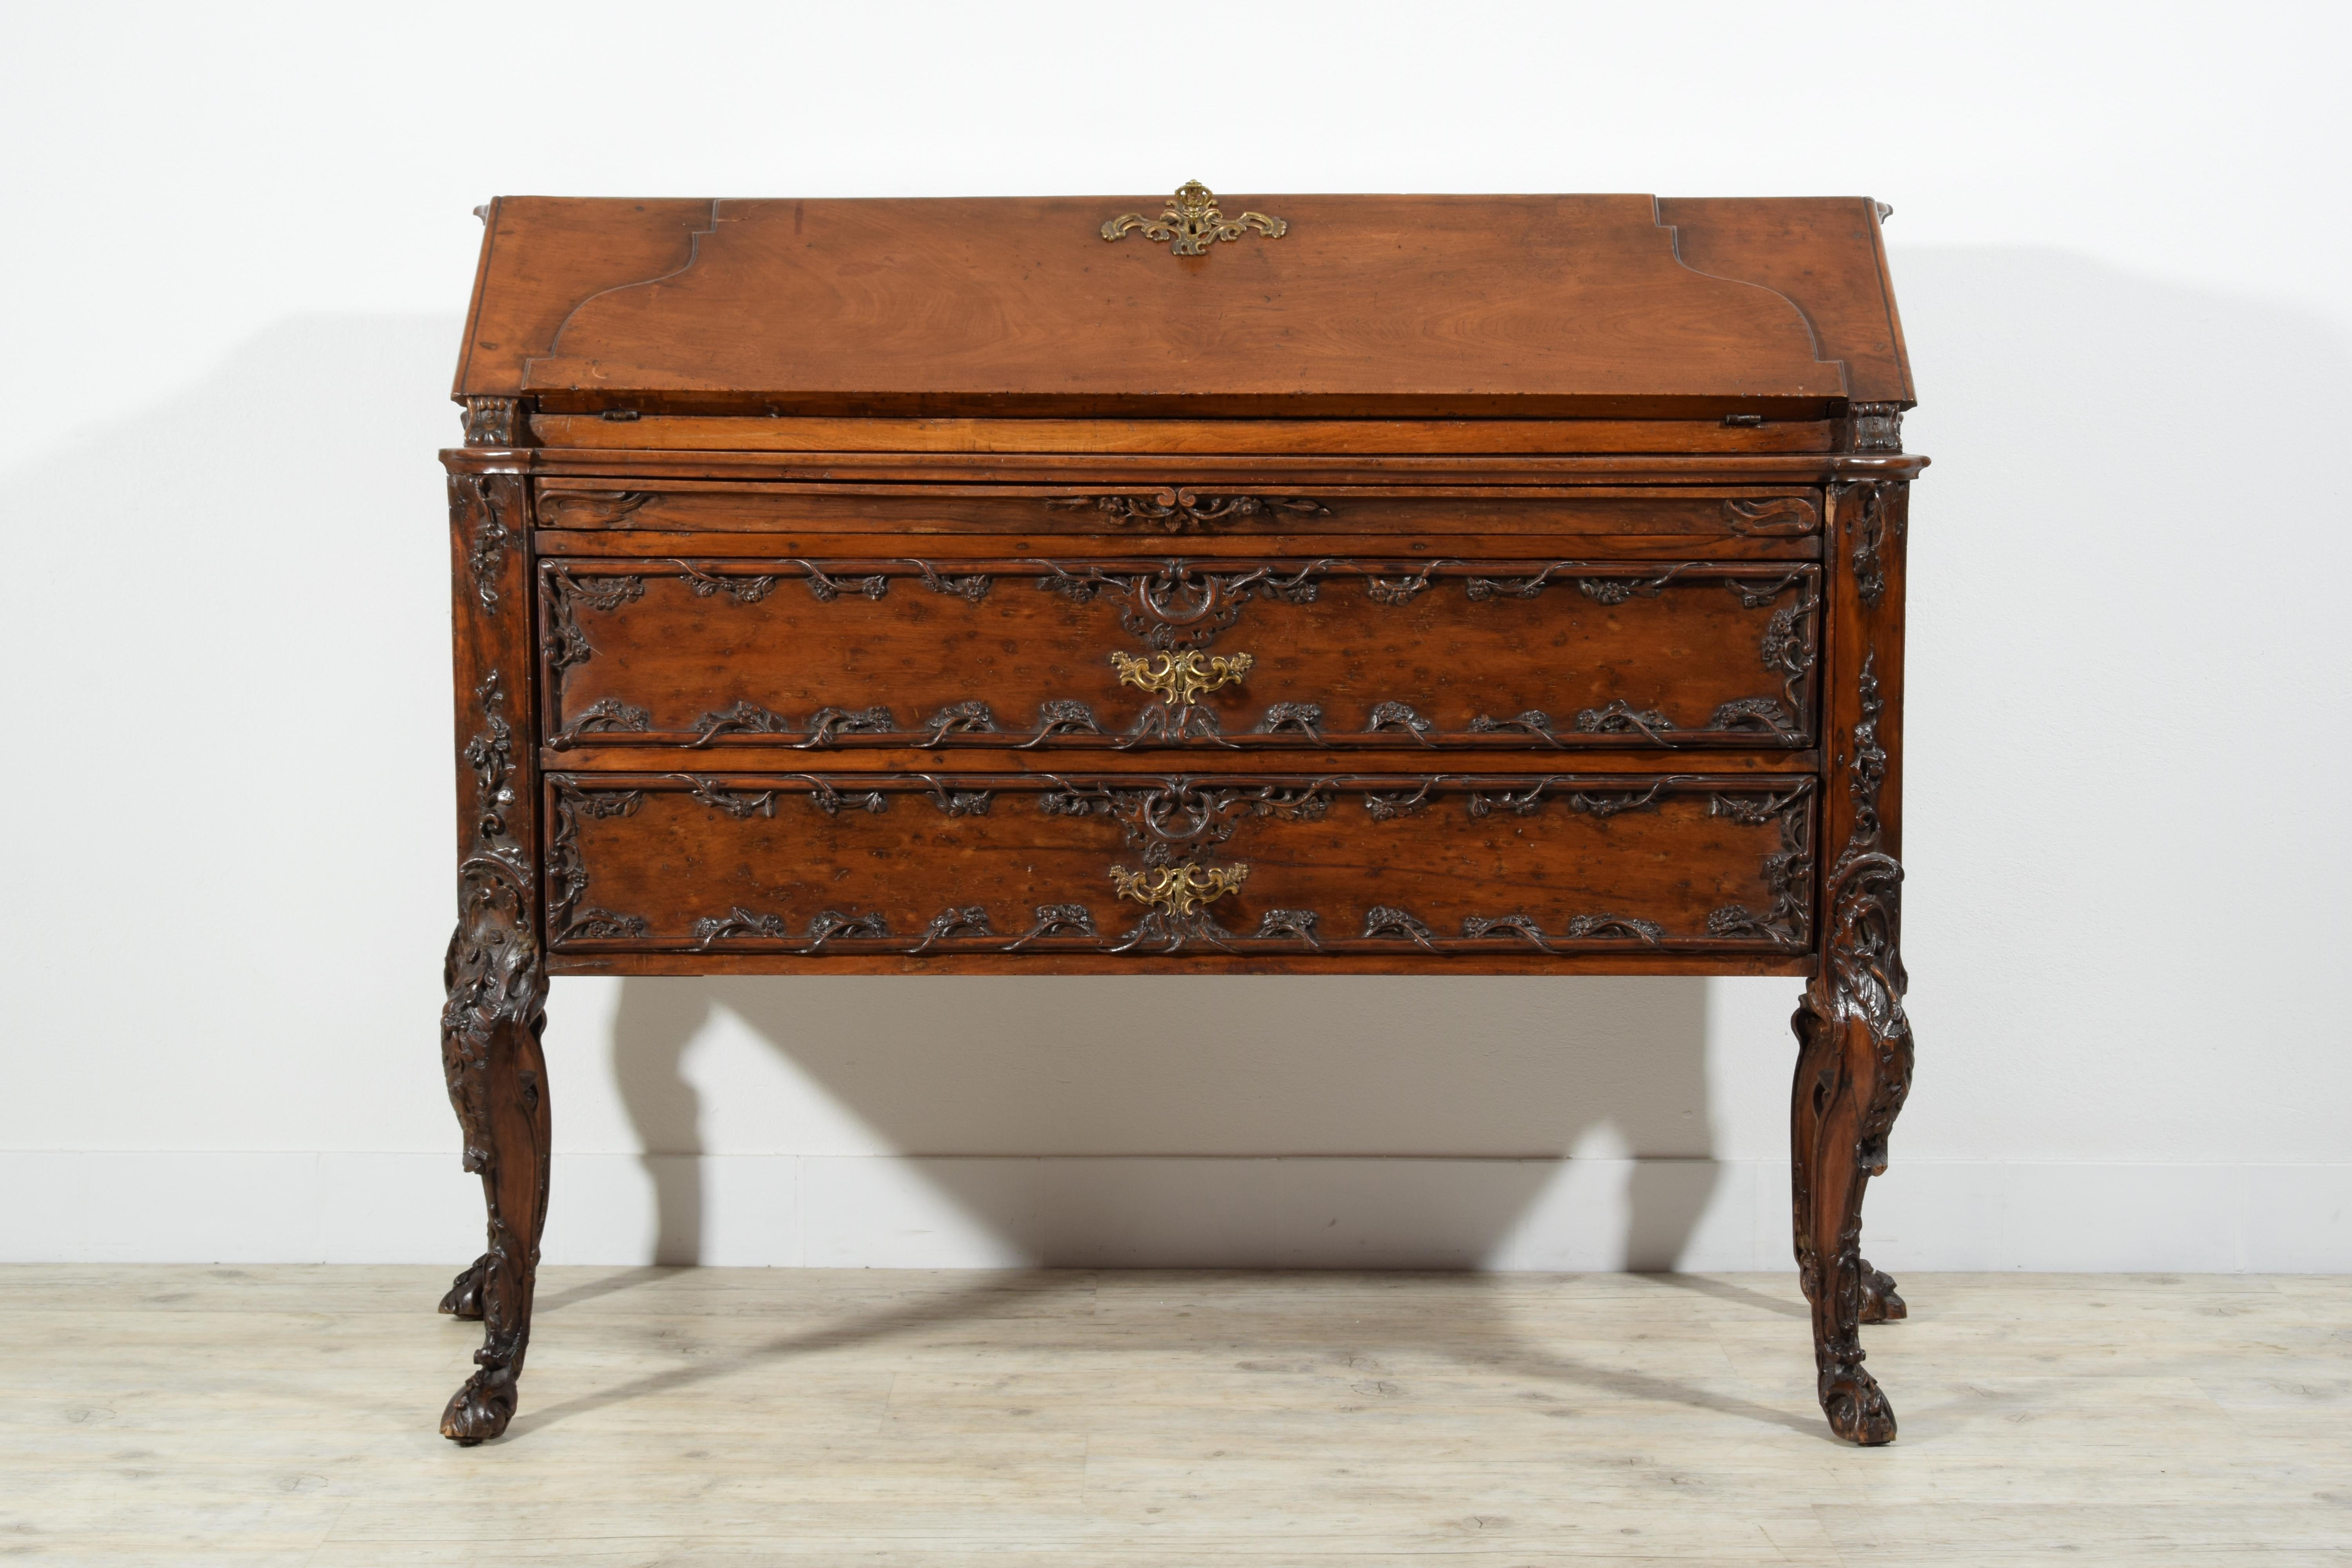 This elegant drop-leaf cabinet was made in the early eighteenth century in walnut wood finely carved with rocaille motifs. It has a particular patina of the carvings, slightly darker and brighter, which creates an effect similar to that of bronze.